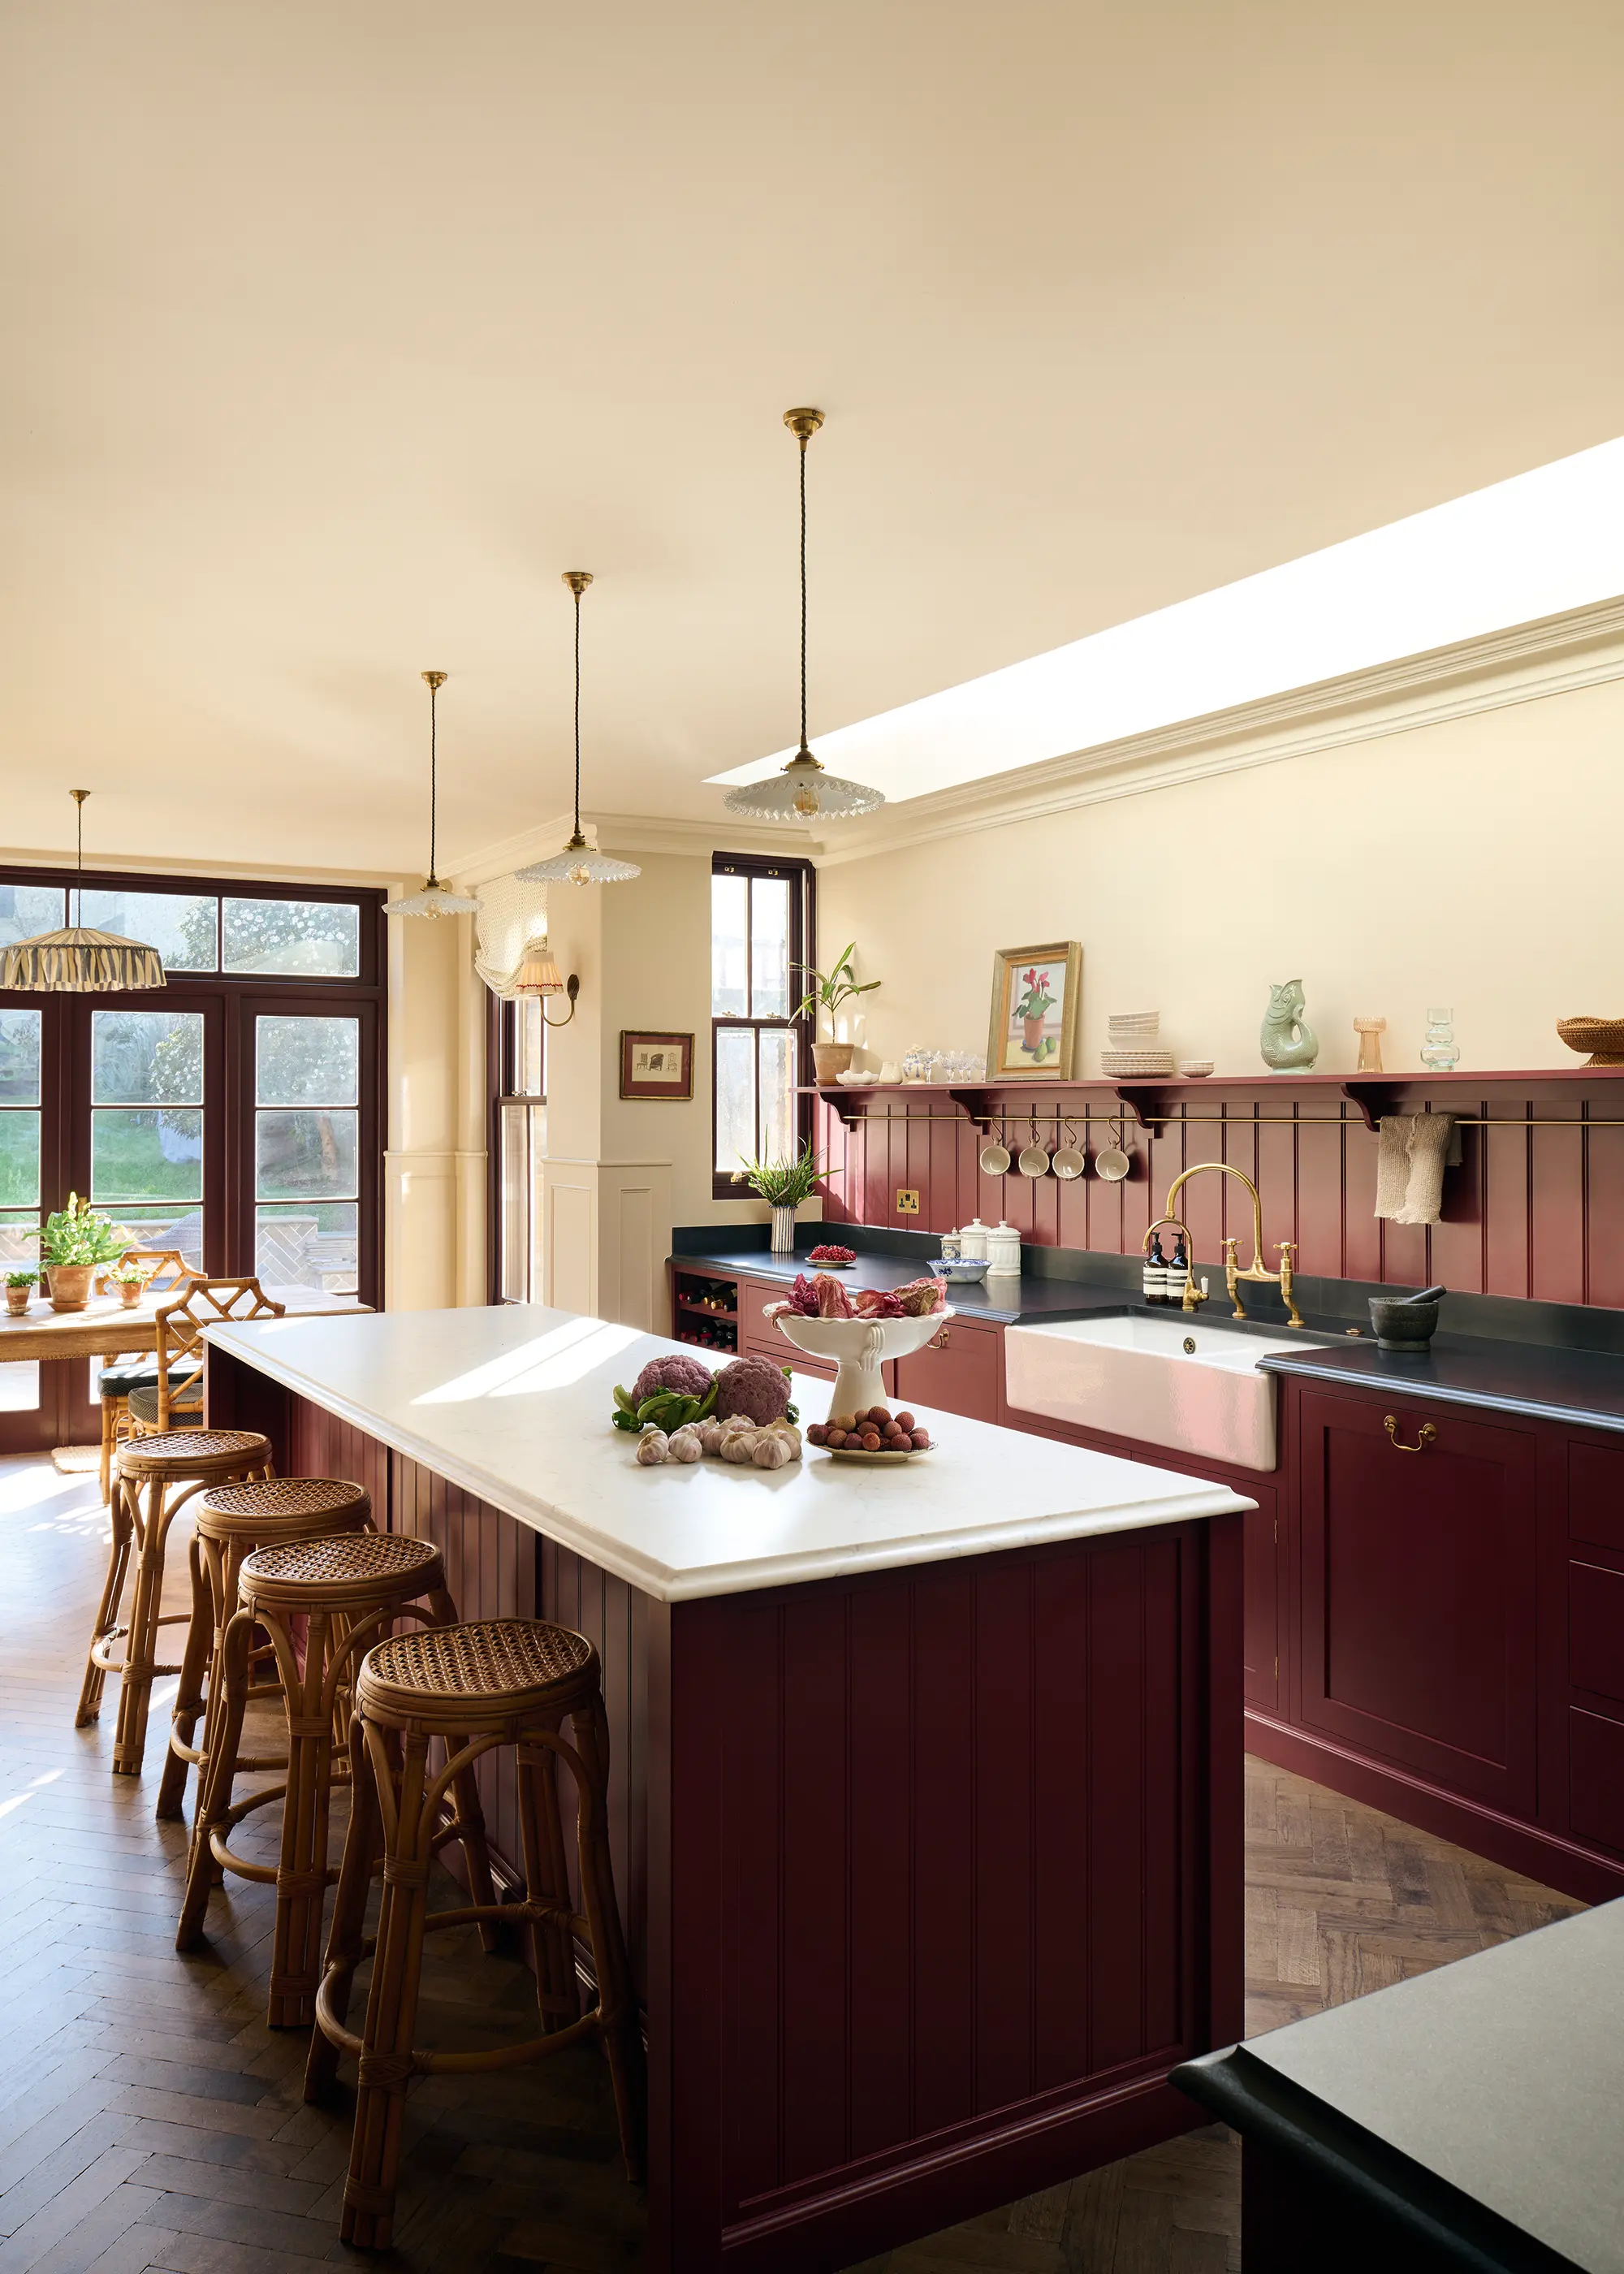 How Much Does a New Kitchen Cost? Kitchen Design & Installation Costs